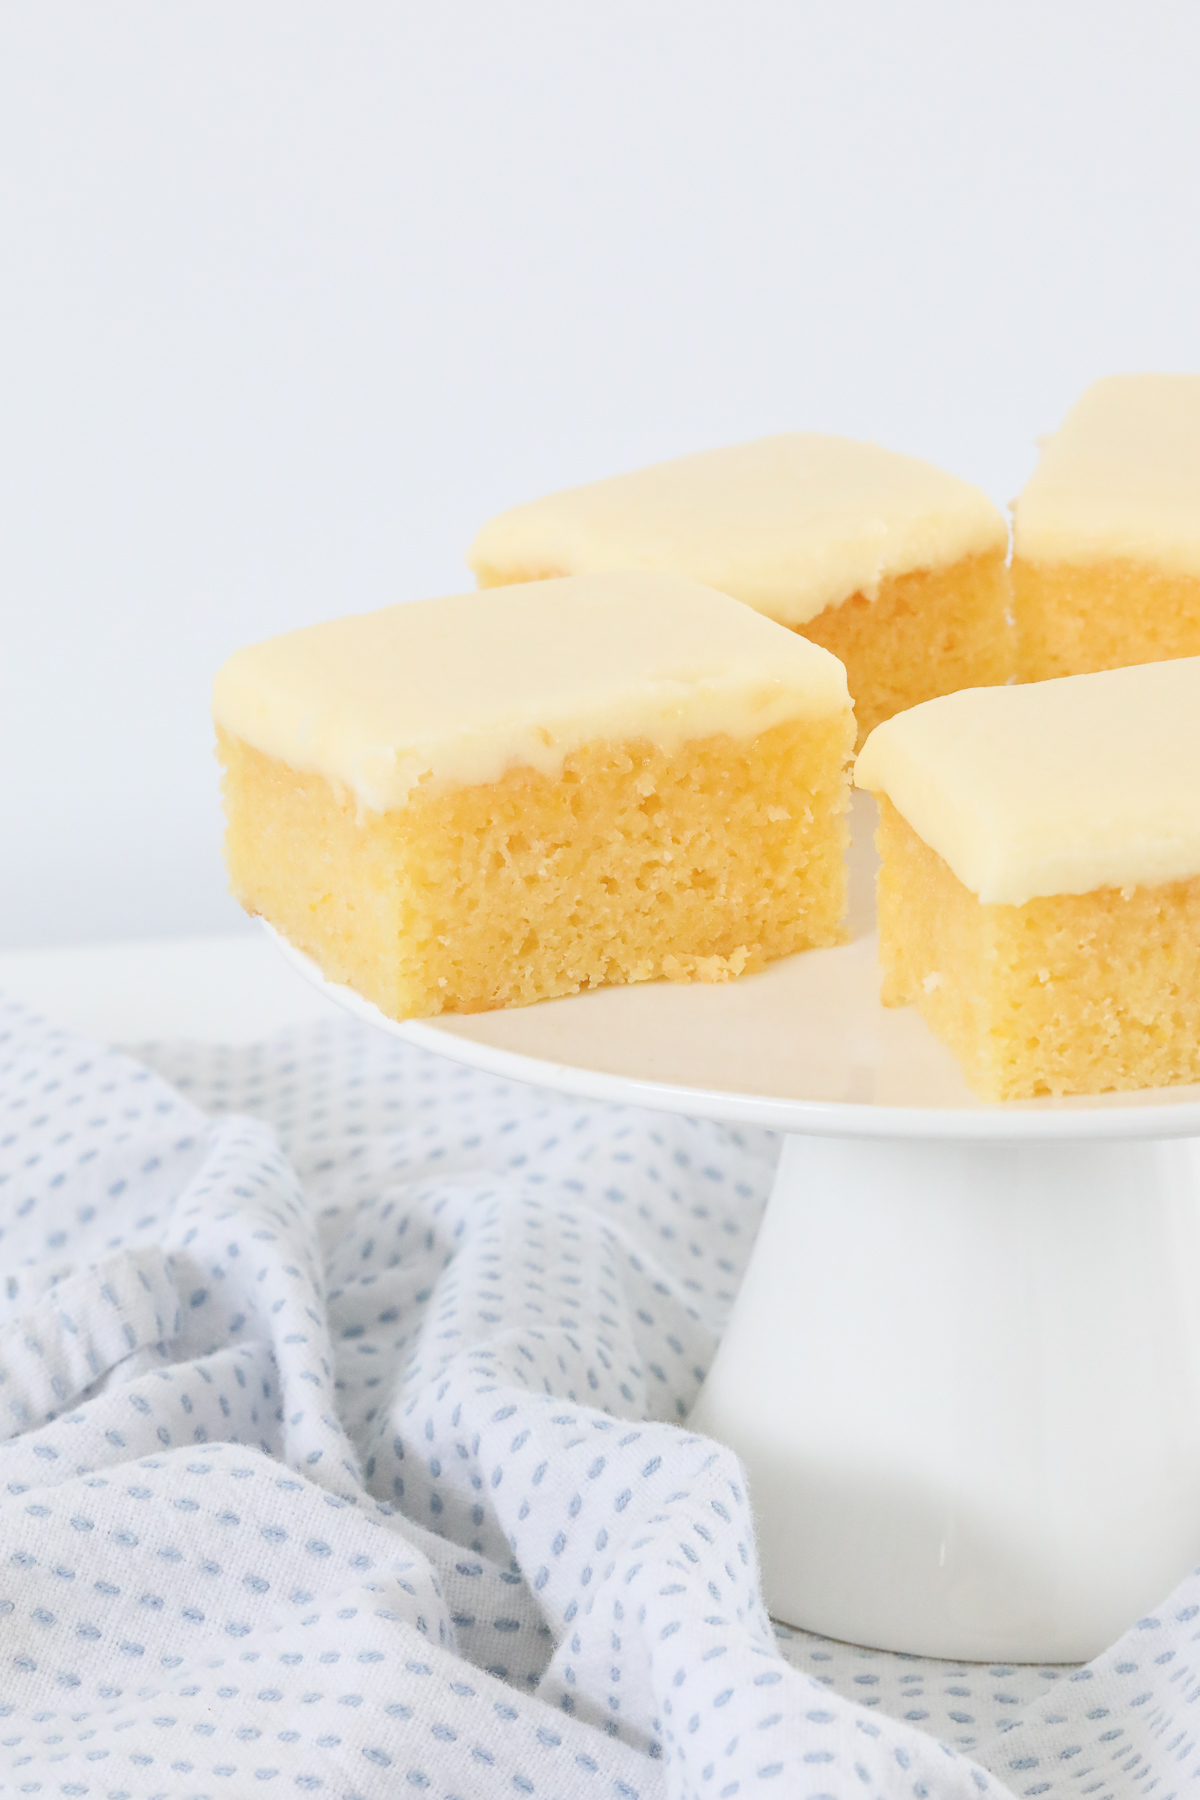 Pieces of a baked lemon slice on a white cake stand